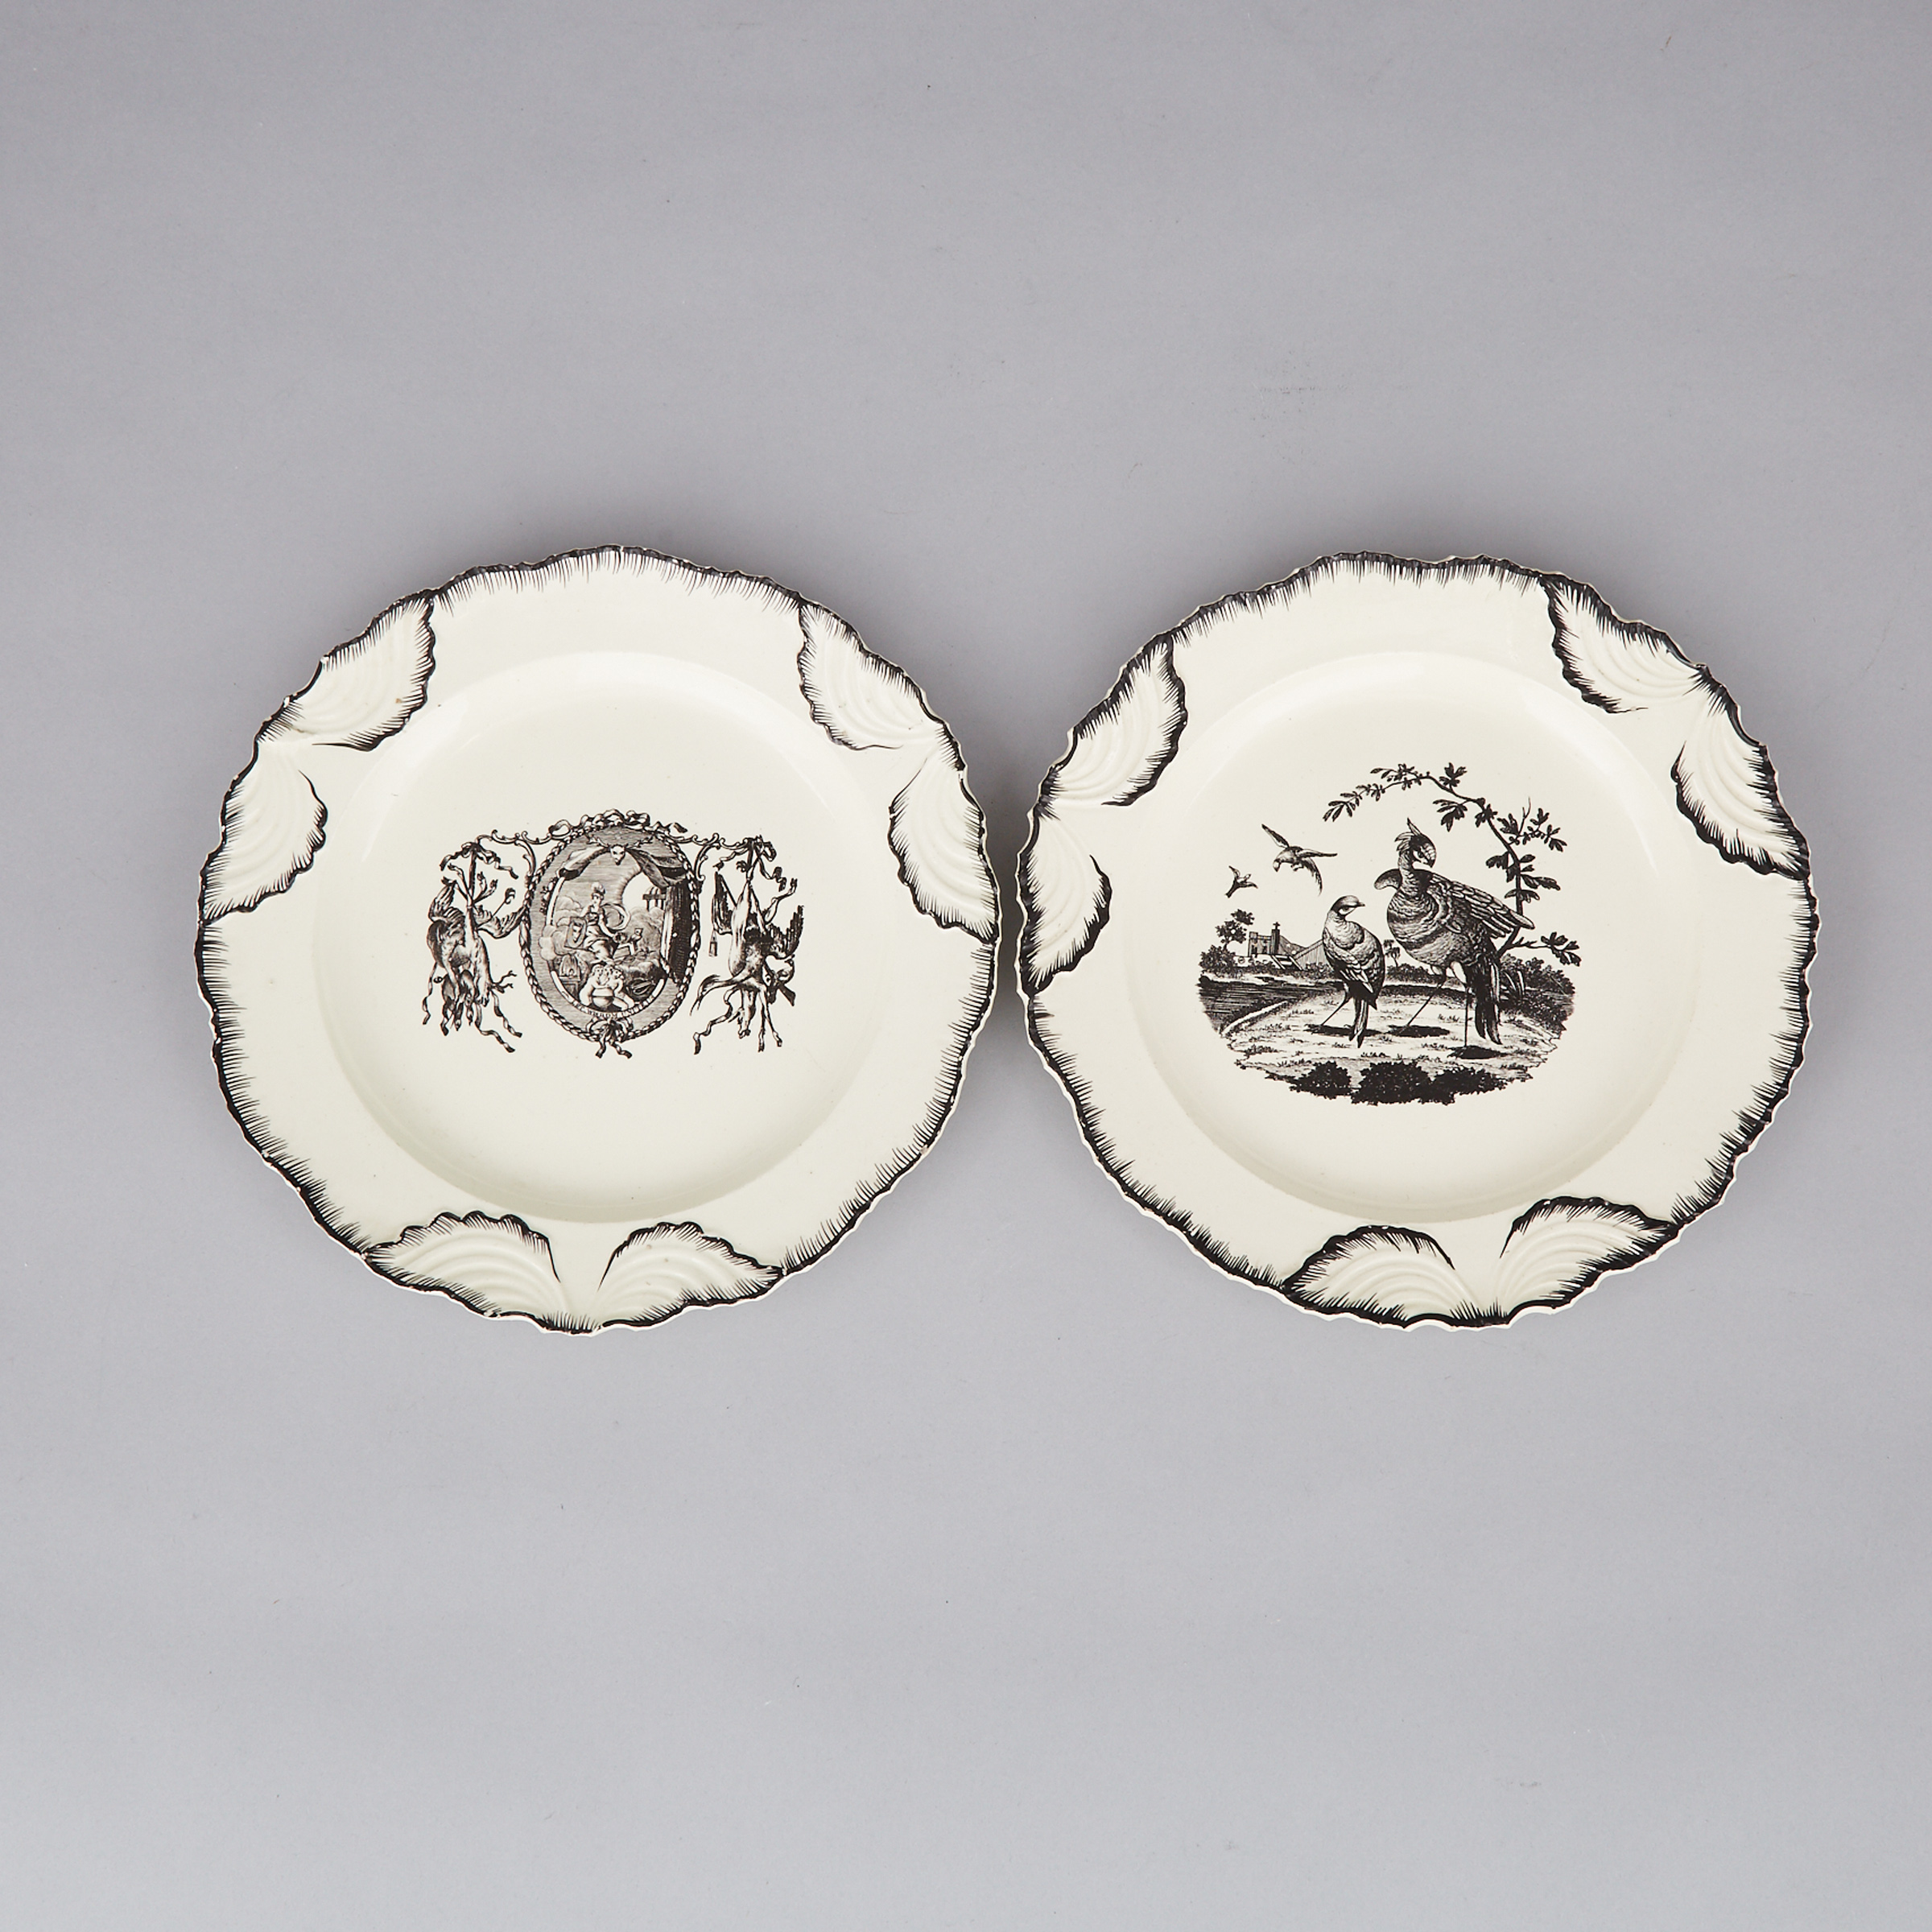 Two English Moulded and Black Printed Creamware Plates, late 18th century